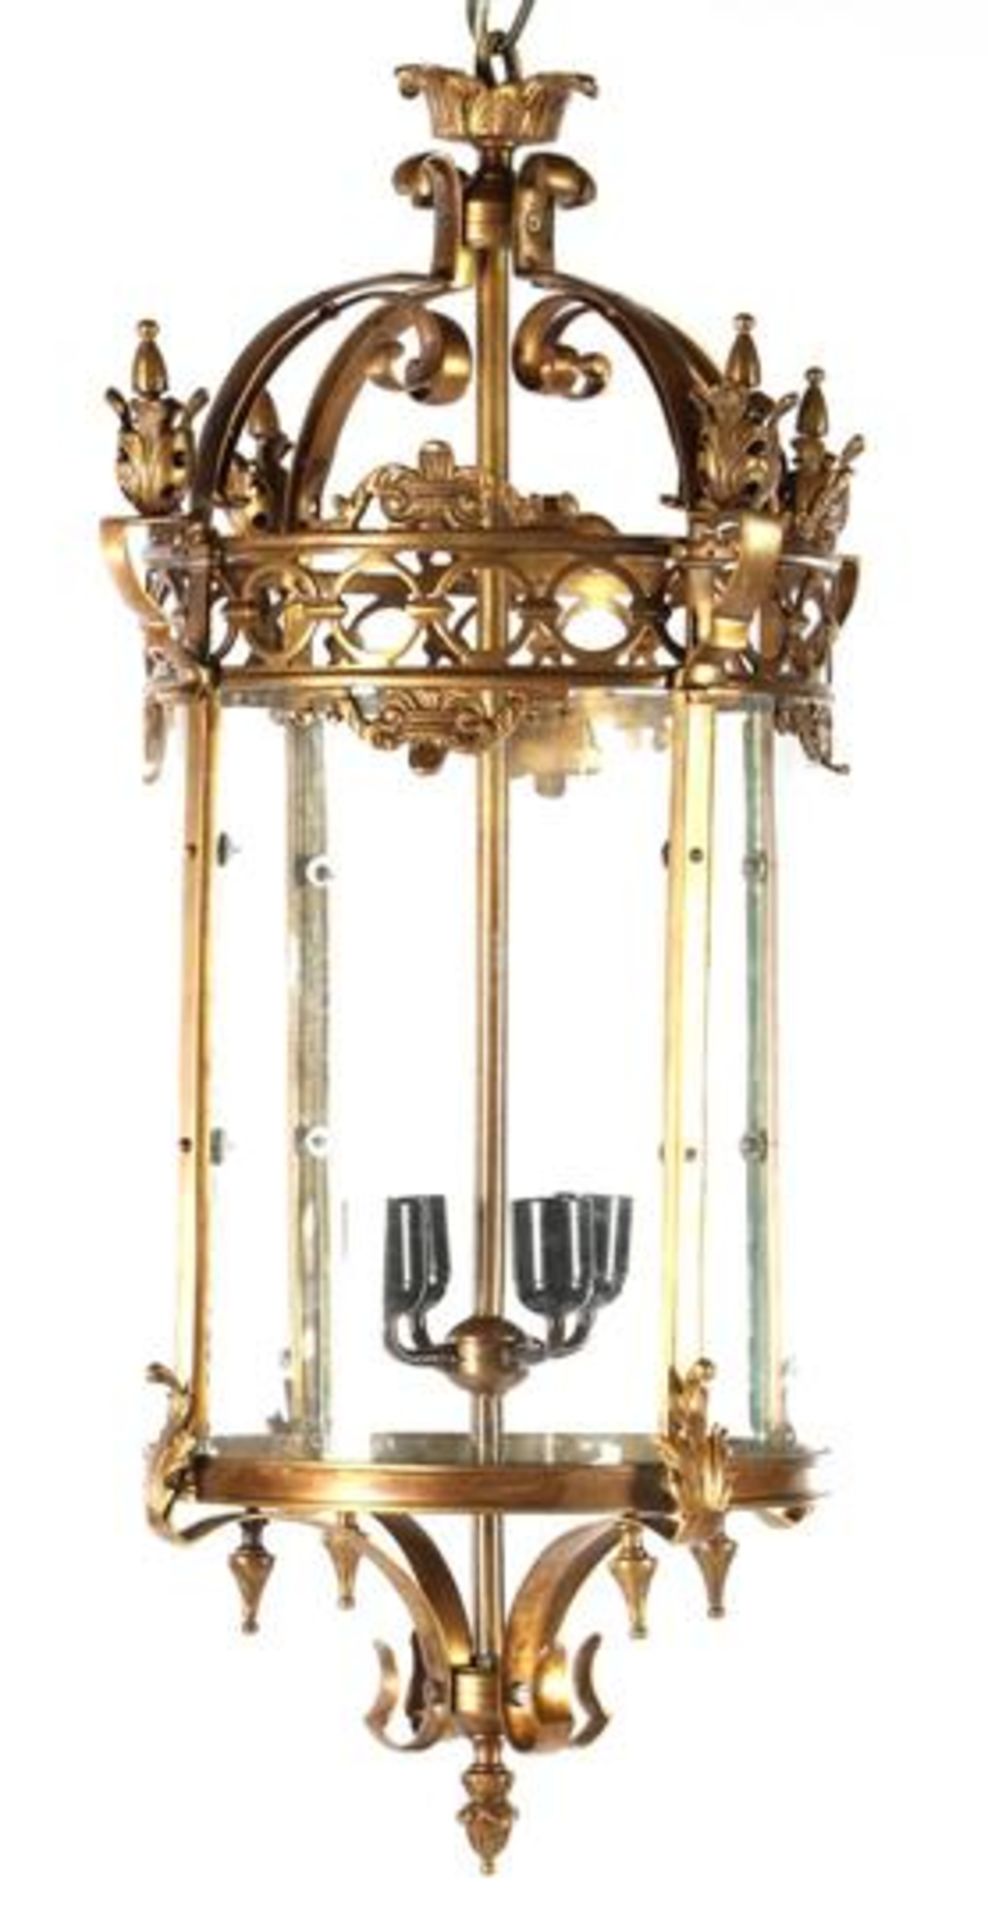 Bronze lantern after an antique model with glass panes, approx. 90 cm high